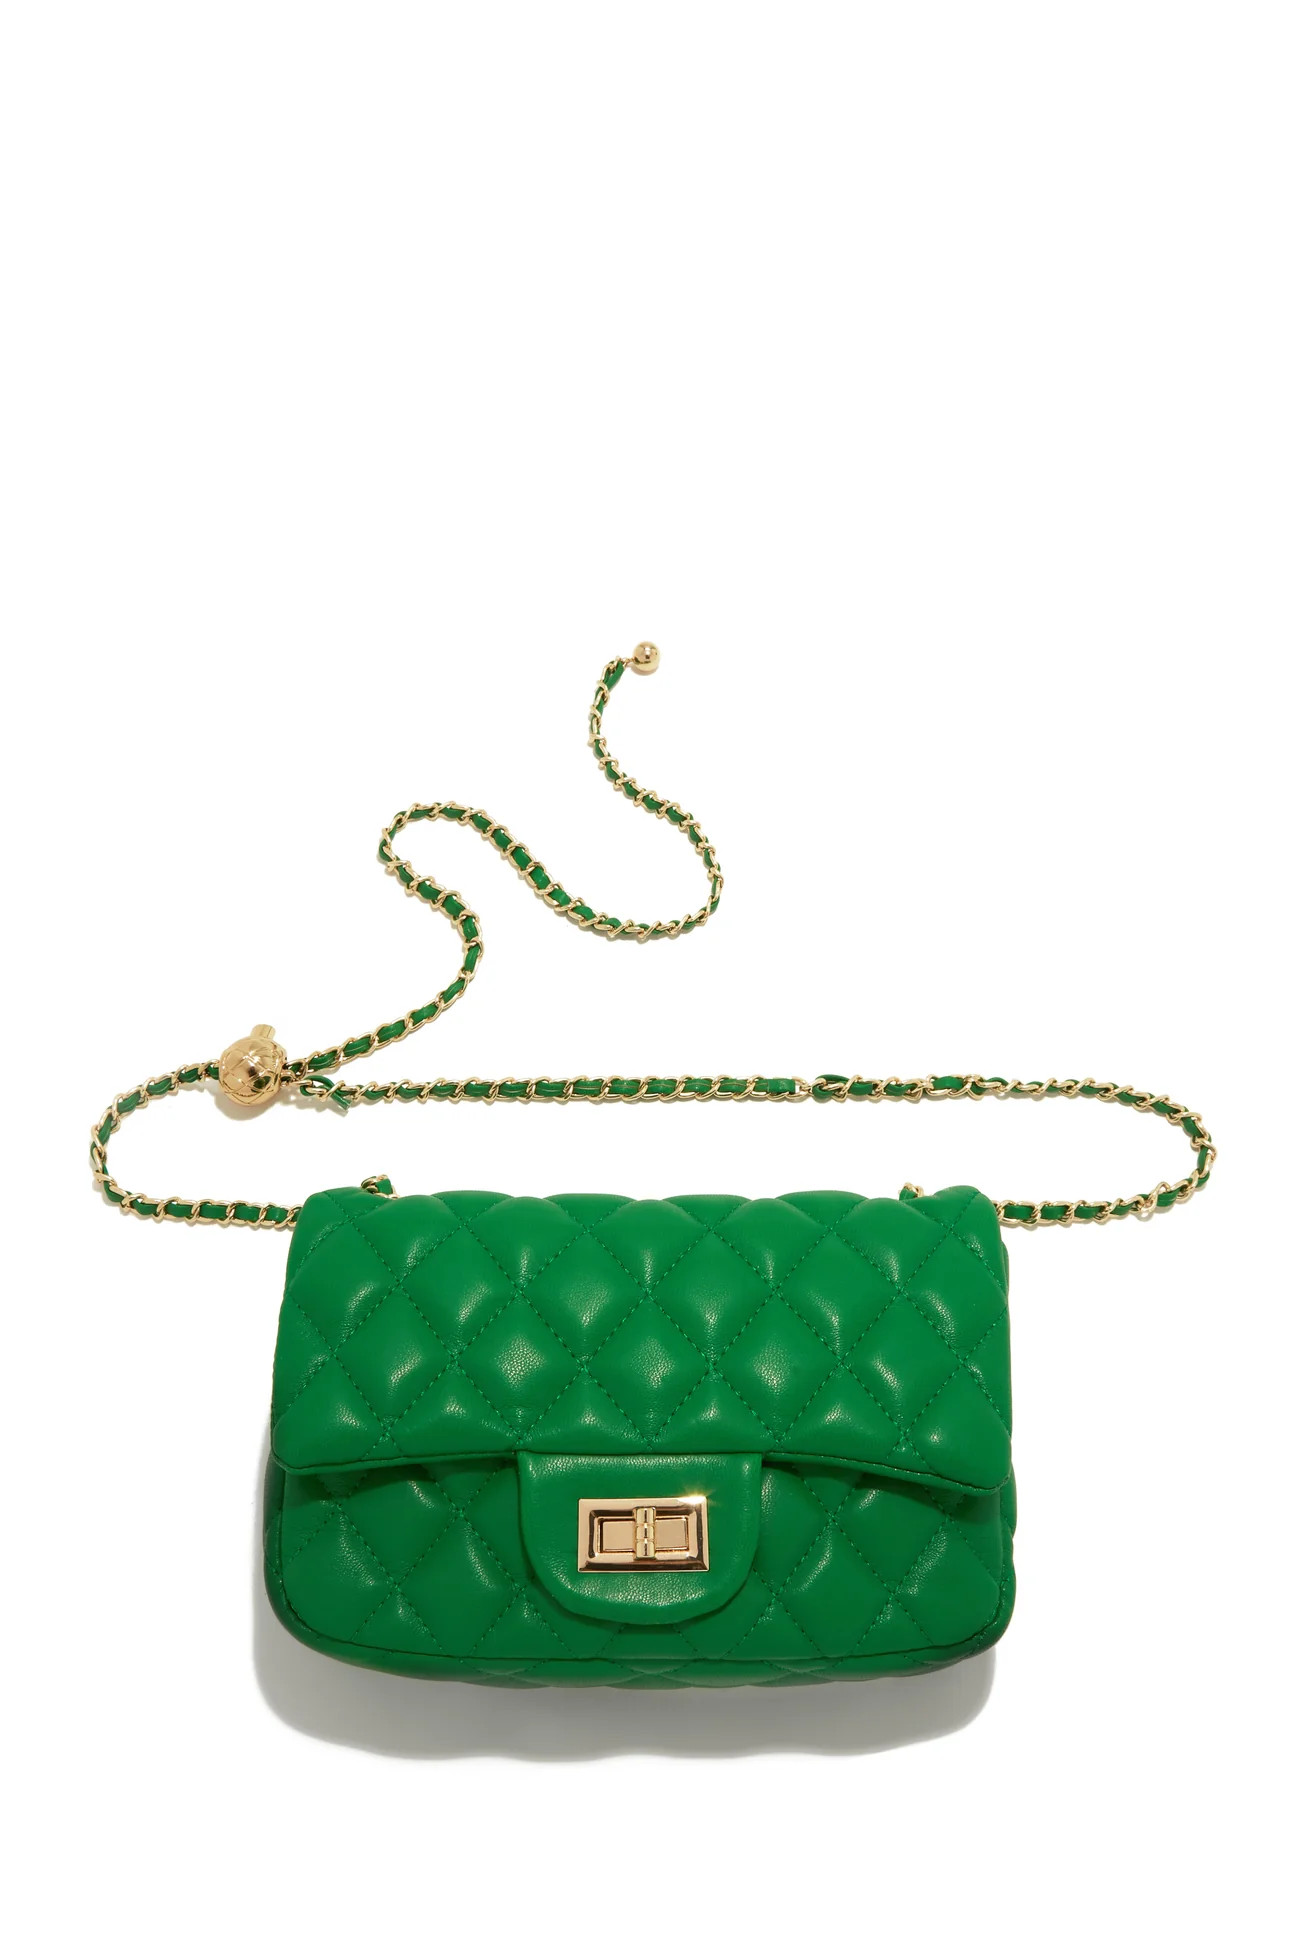 Miss Lola | Christa Green Quilted Flap Bag | MISS LOLA